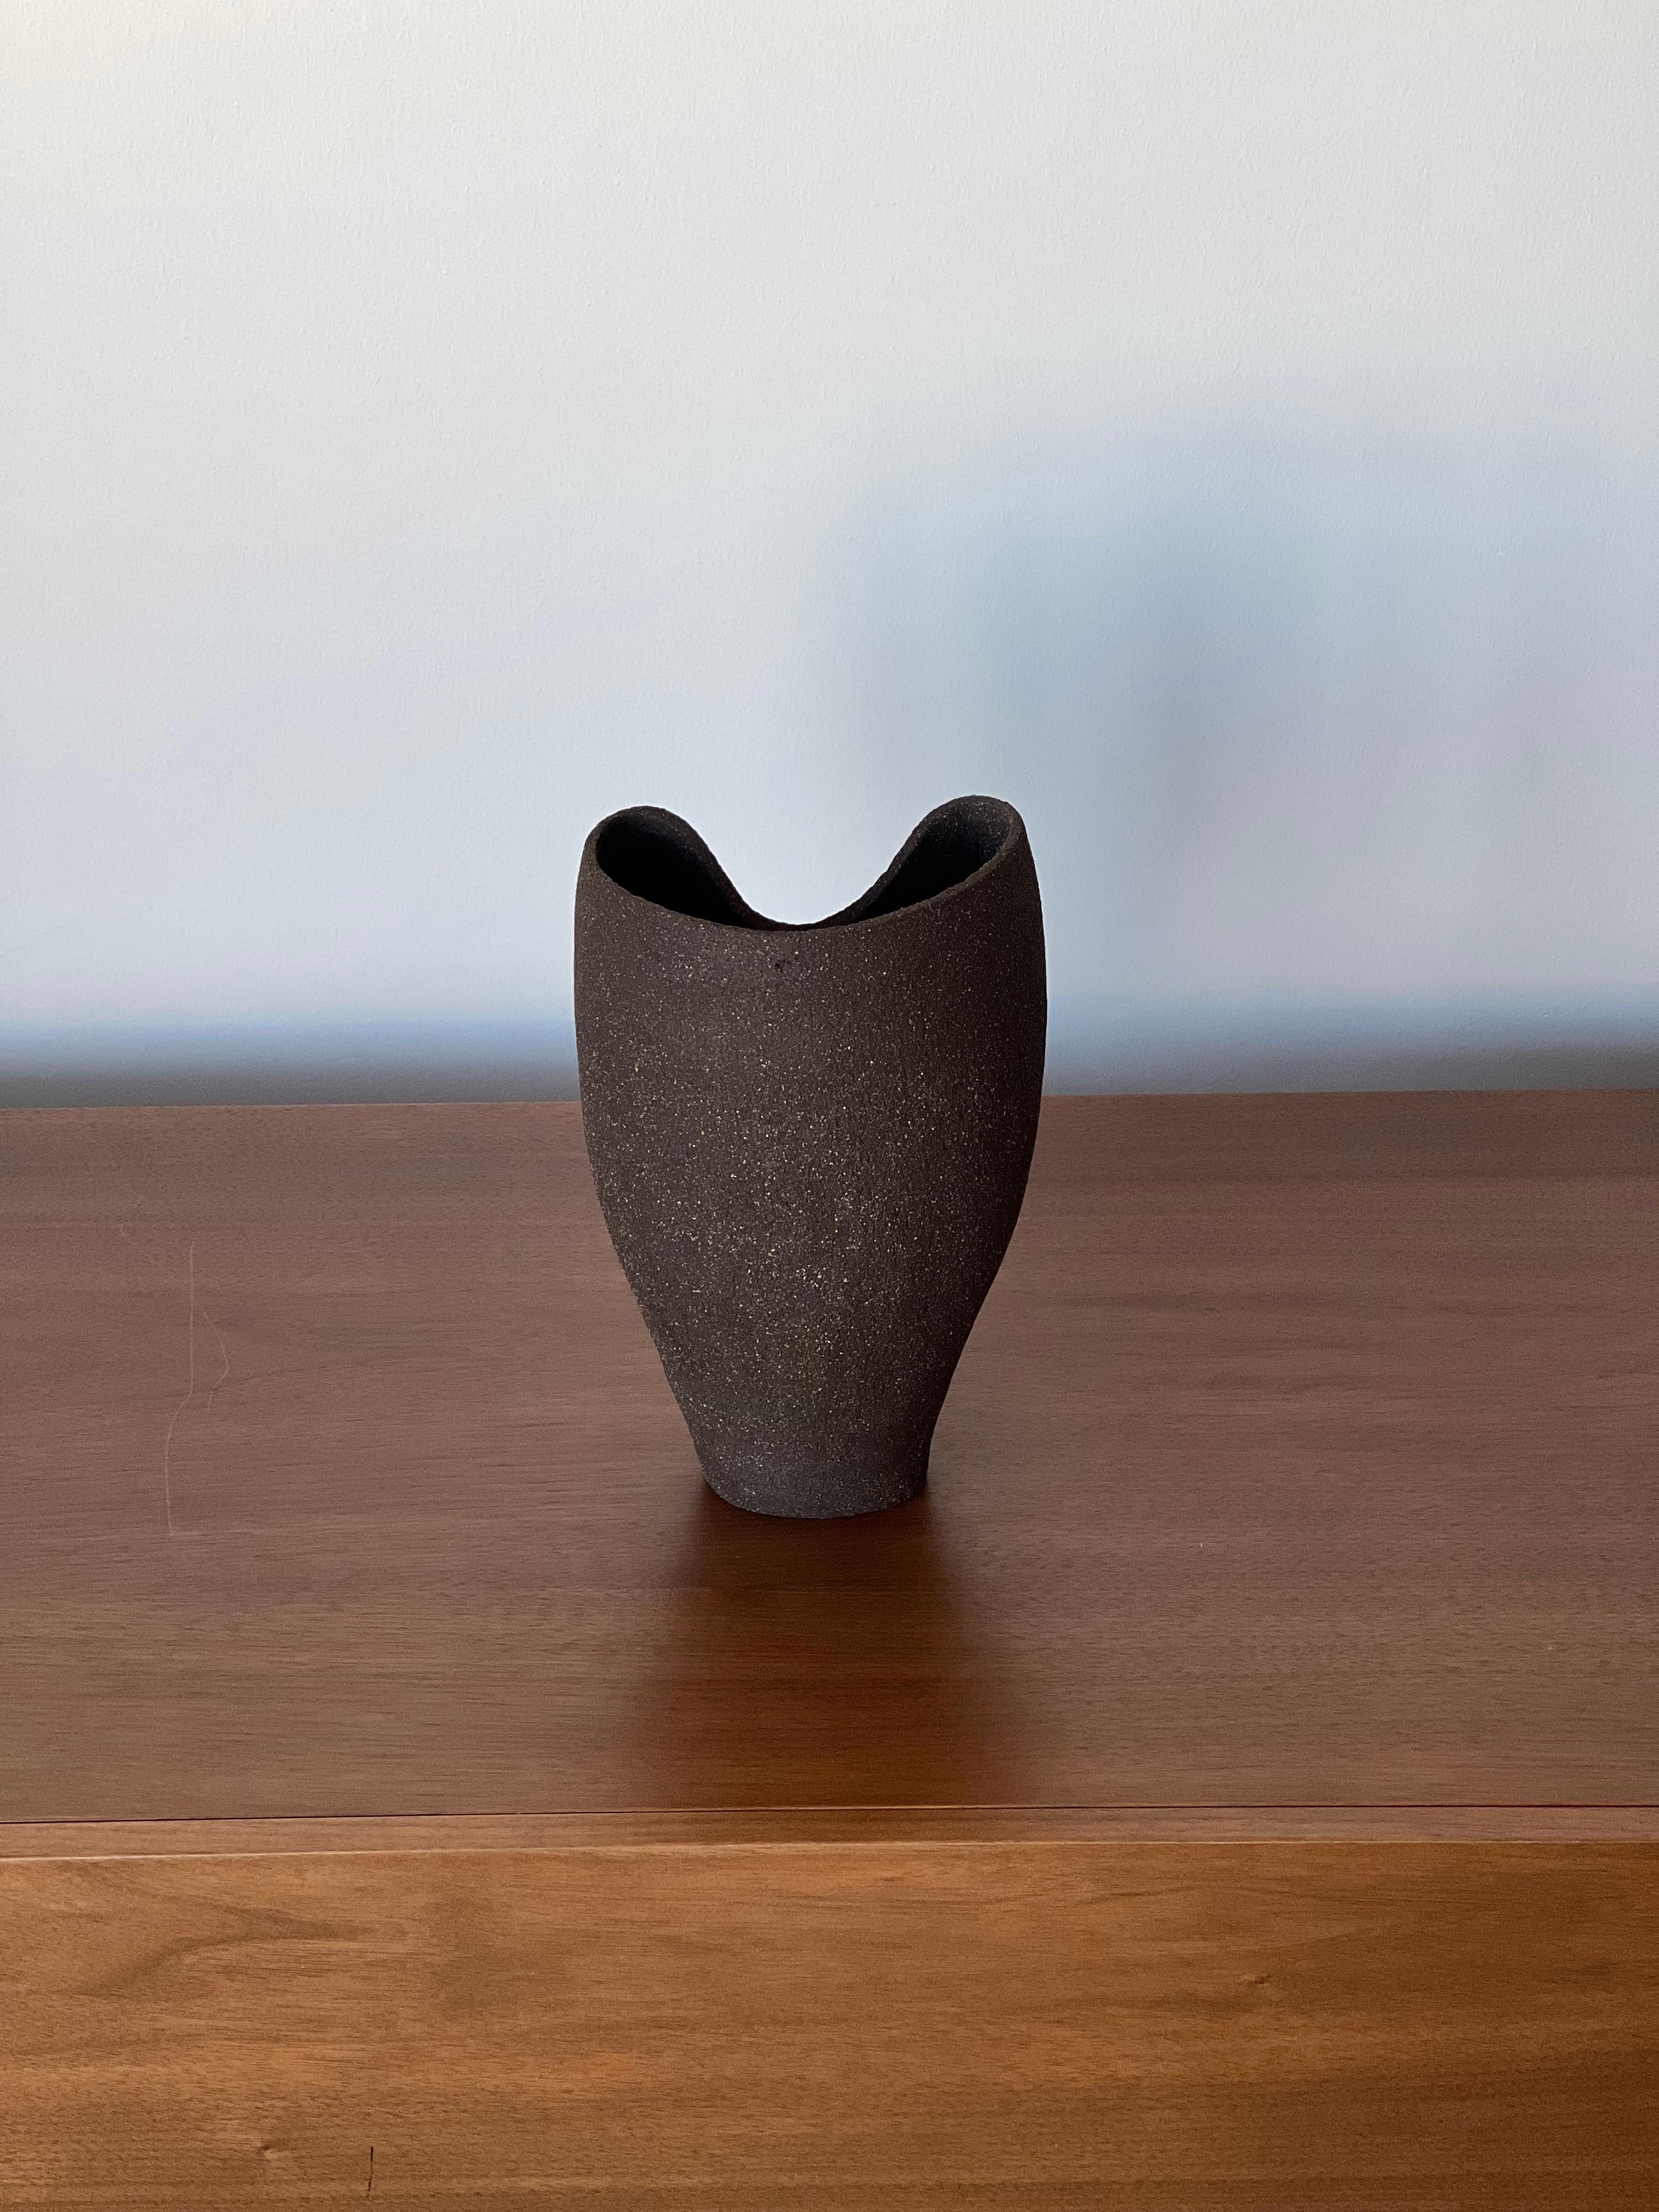 Anatolian 3 Vase by Güler Elçi
Dimensions: W 15.2 x D 12.7 x H 24.1 cm.
Materials: Stoneware Ceramic.

Güler Elçi is a ceramic artist based in Istanbul. In the light of her engineering career, she considers ceramics as a material and likes to push